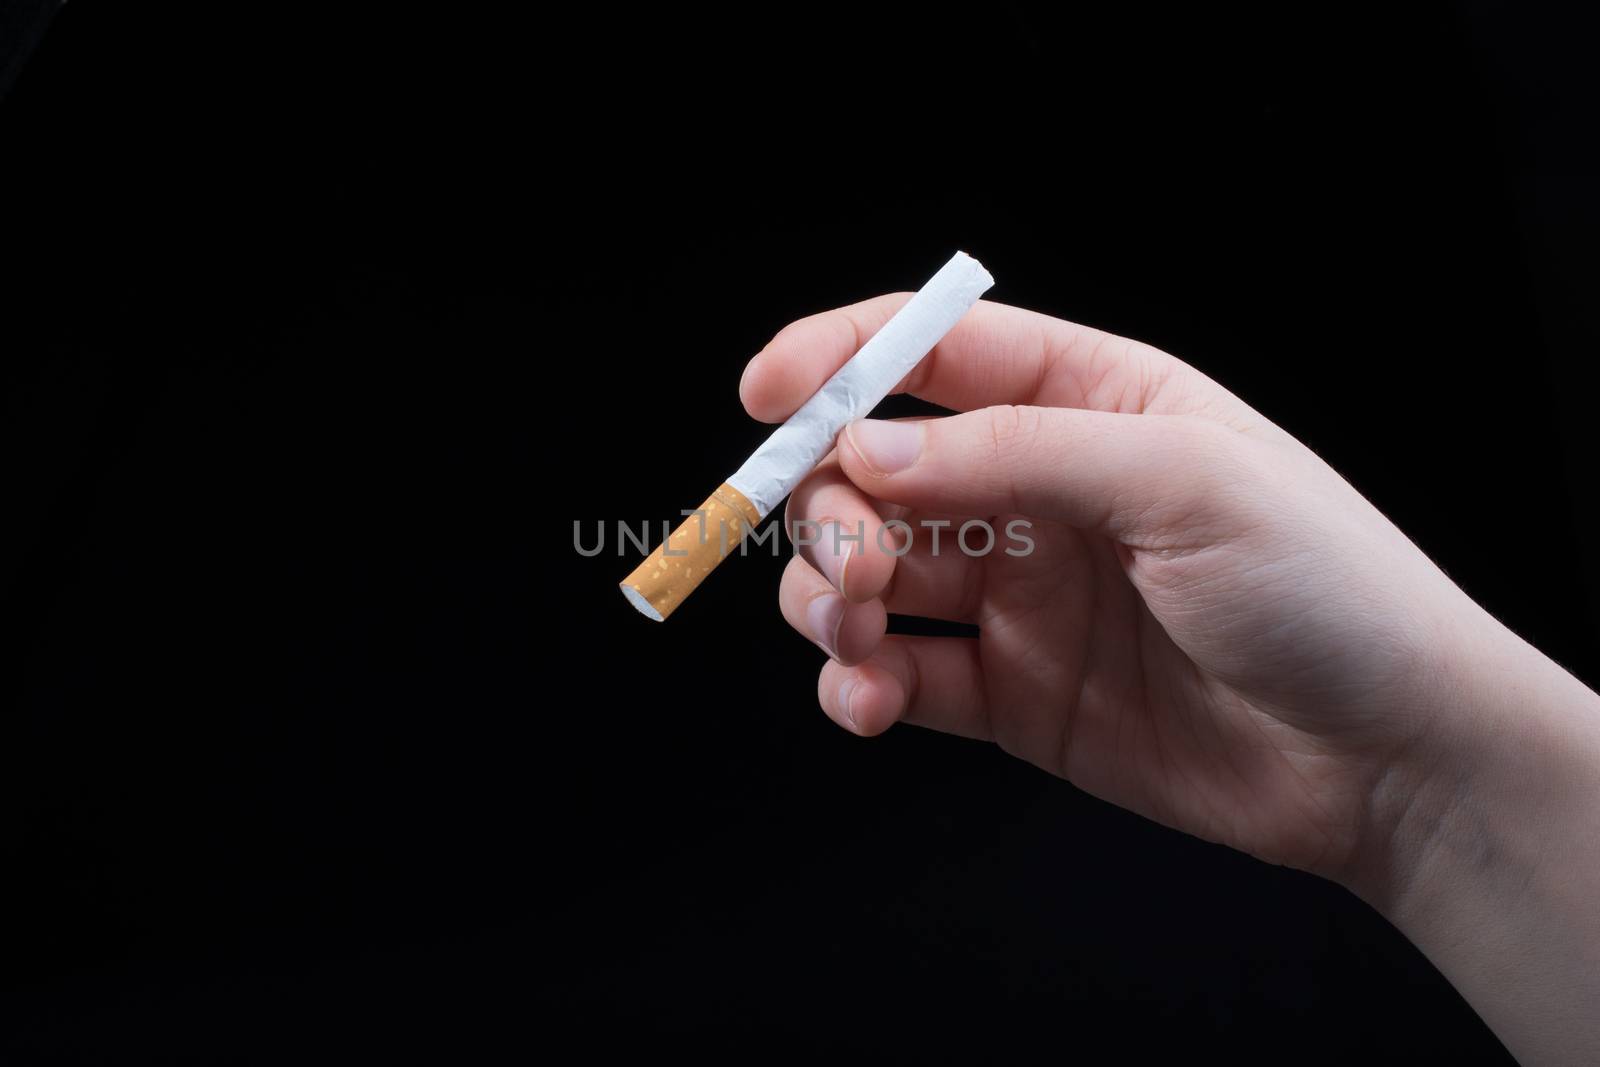 Hand is holding cigarette on a black background